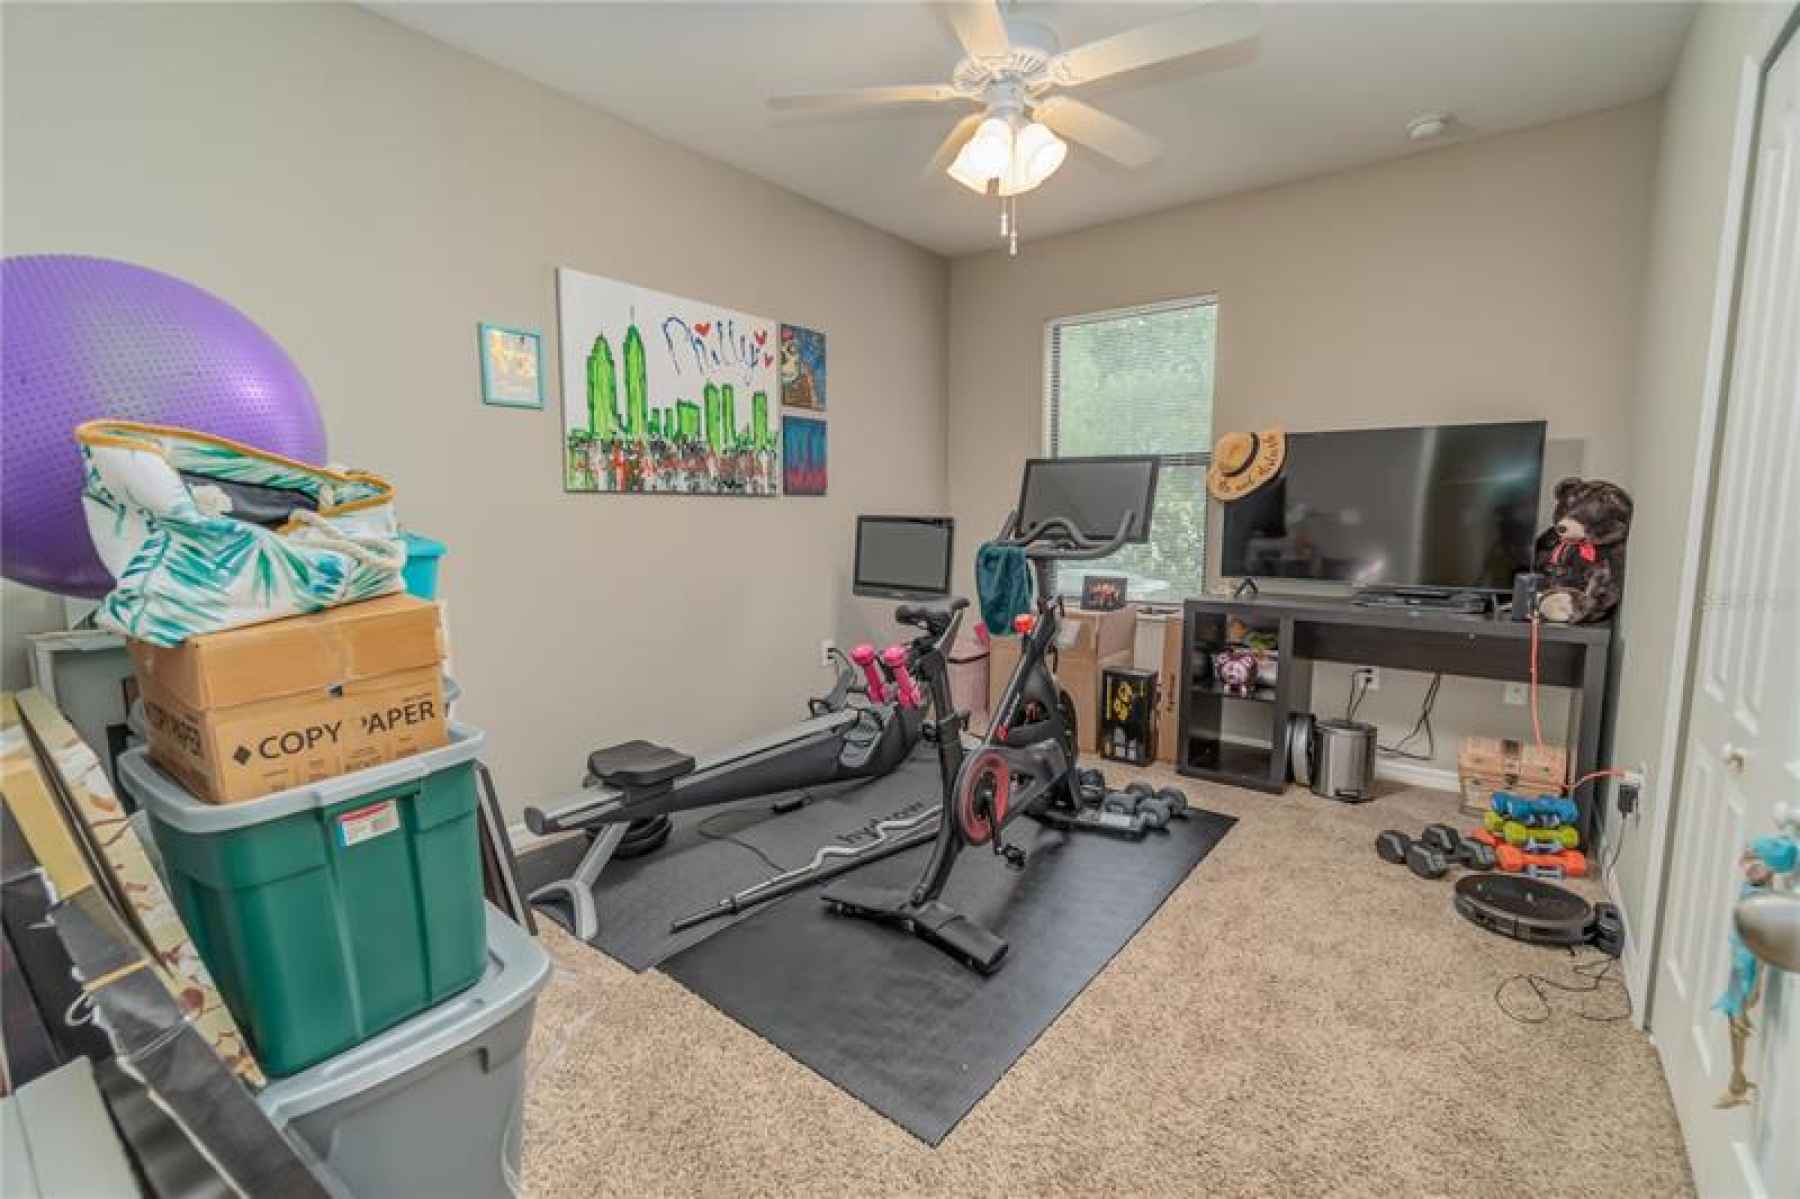 Third Bedroom used by tenant as workout room